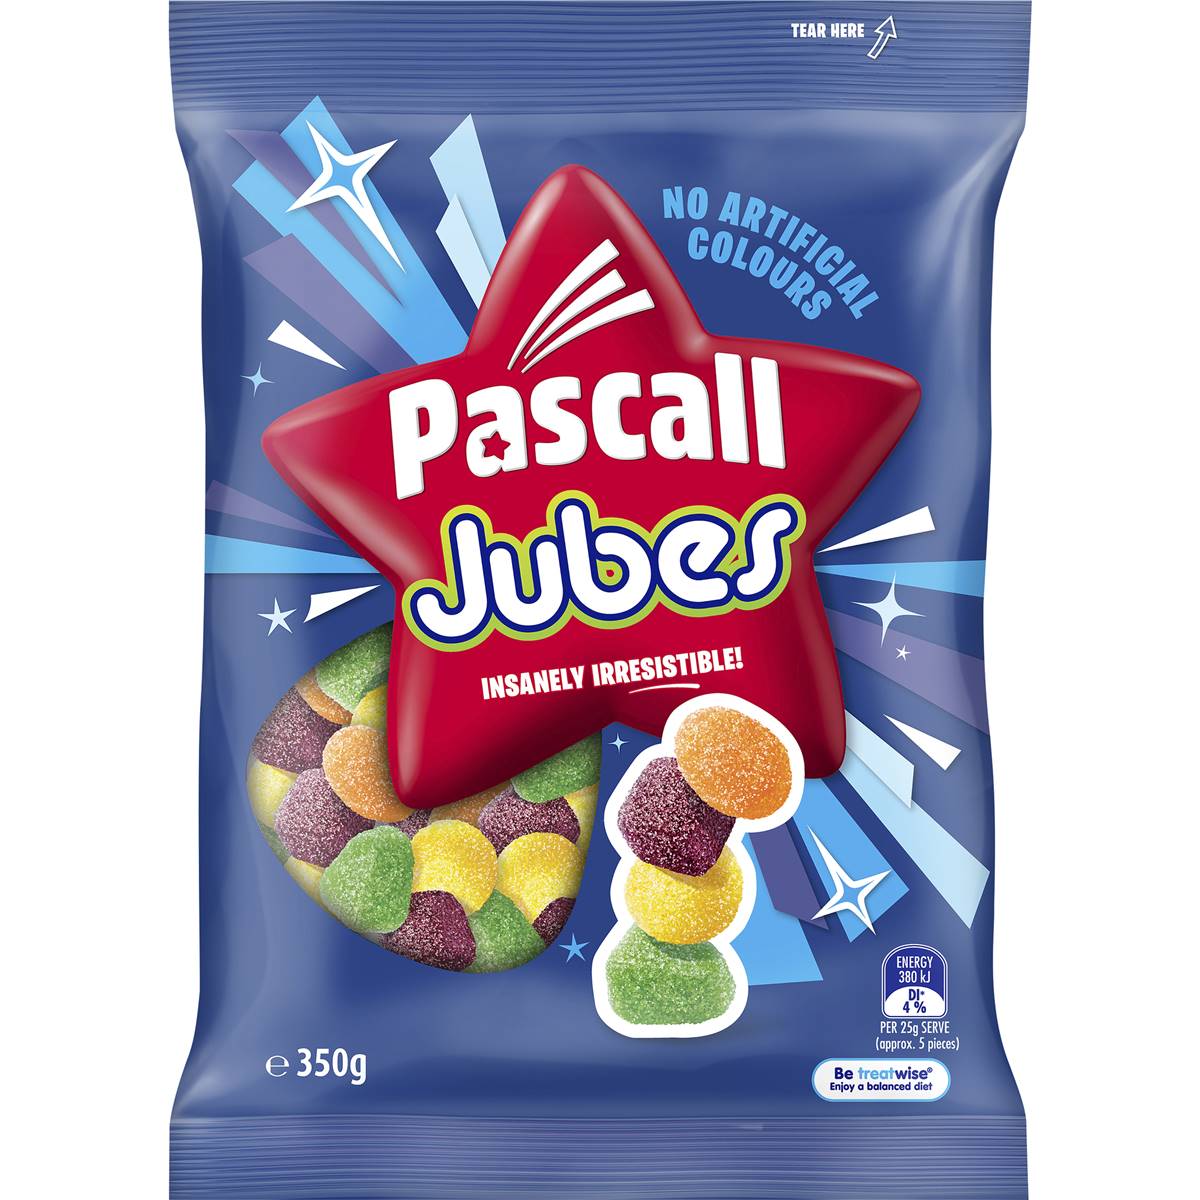 Calories in Pascall Jubes